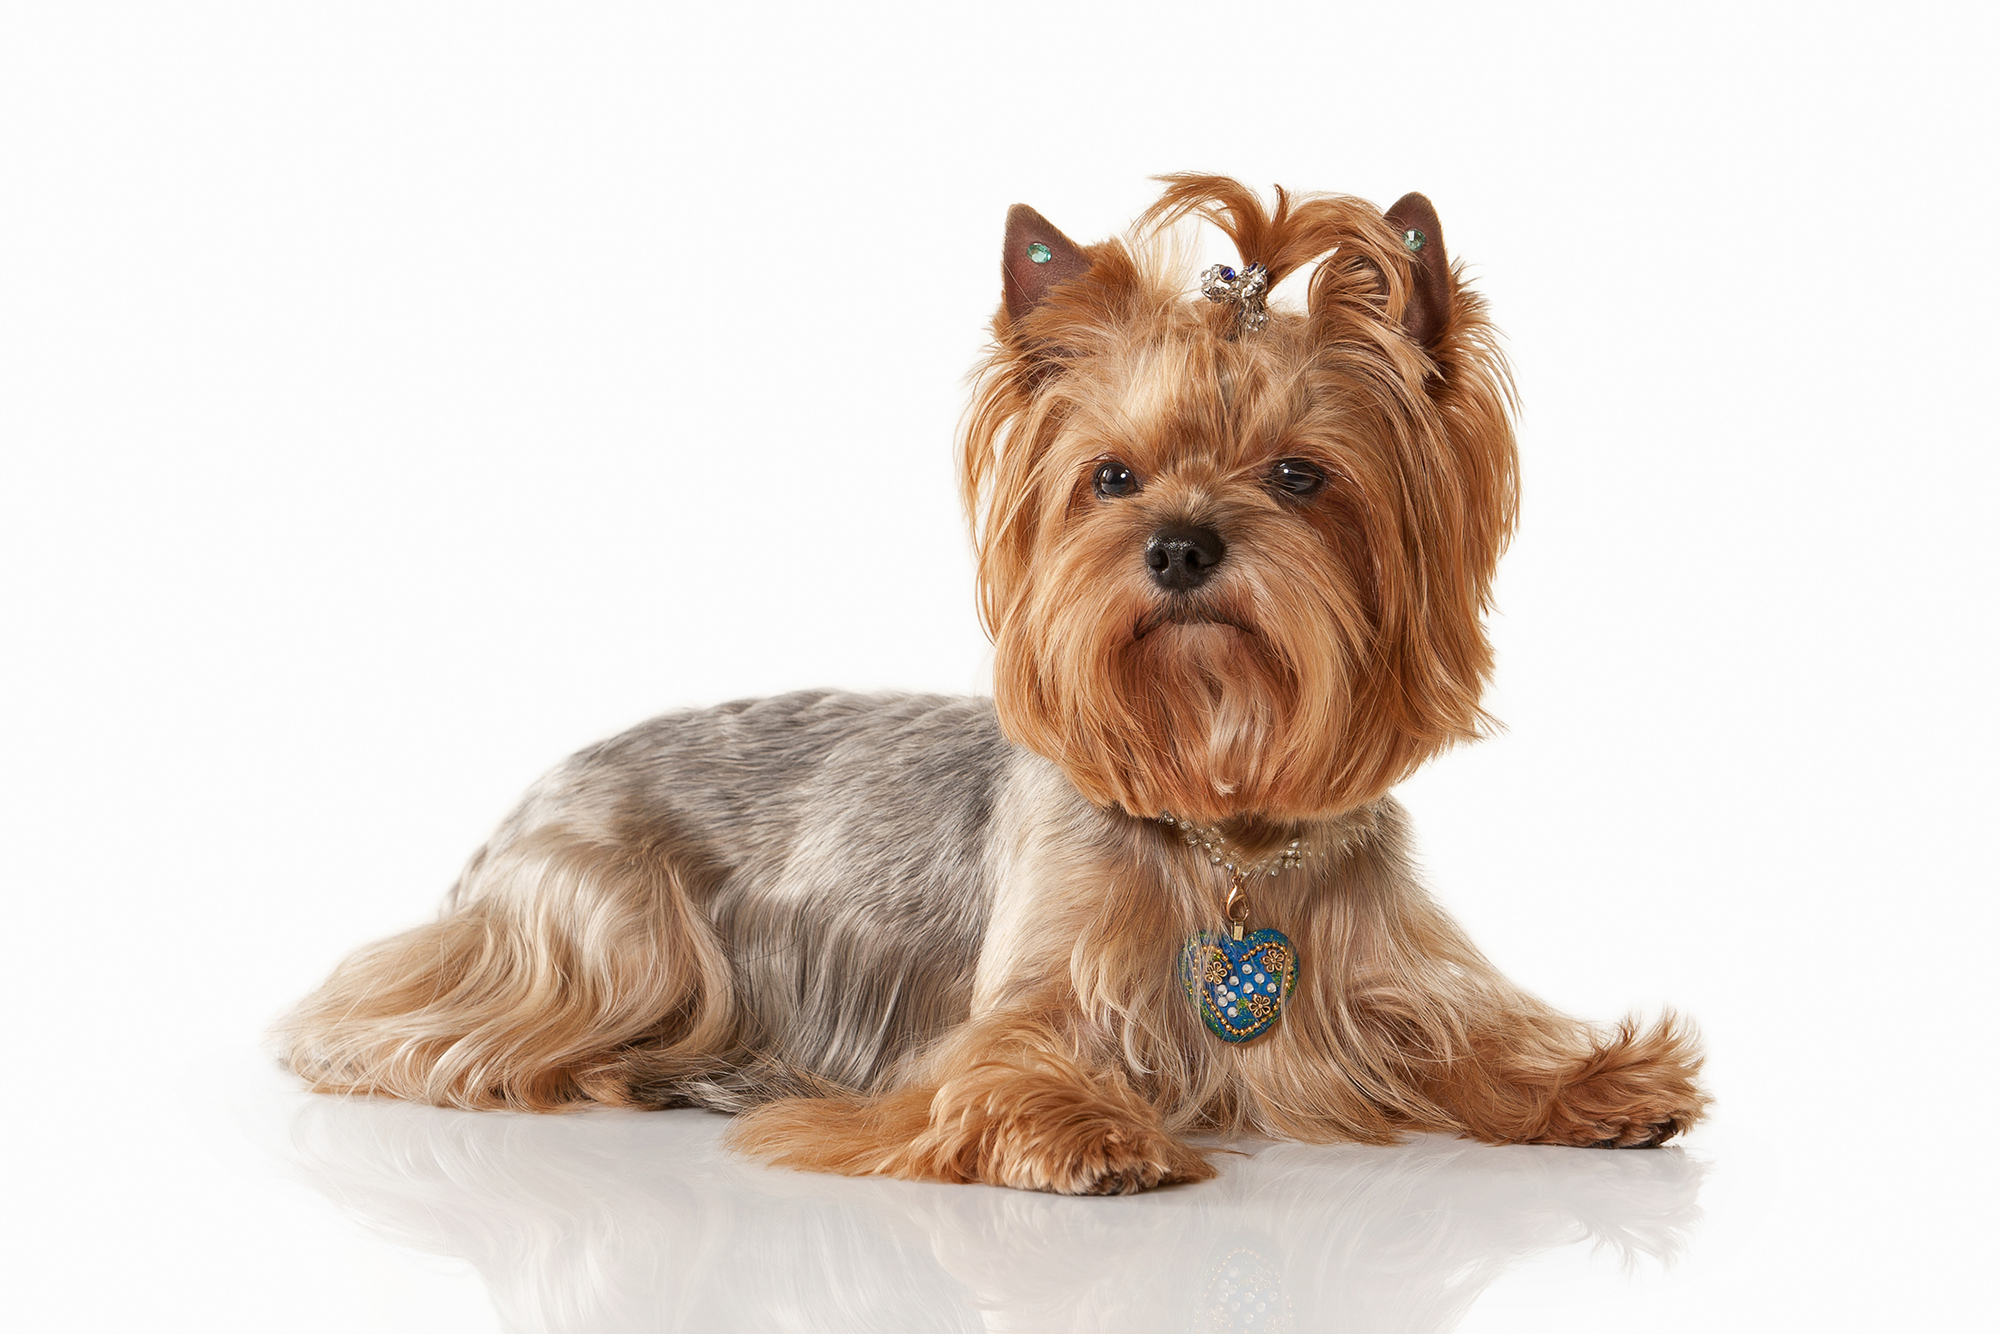 Groomed Yorkie with a ponytail and ear gems